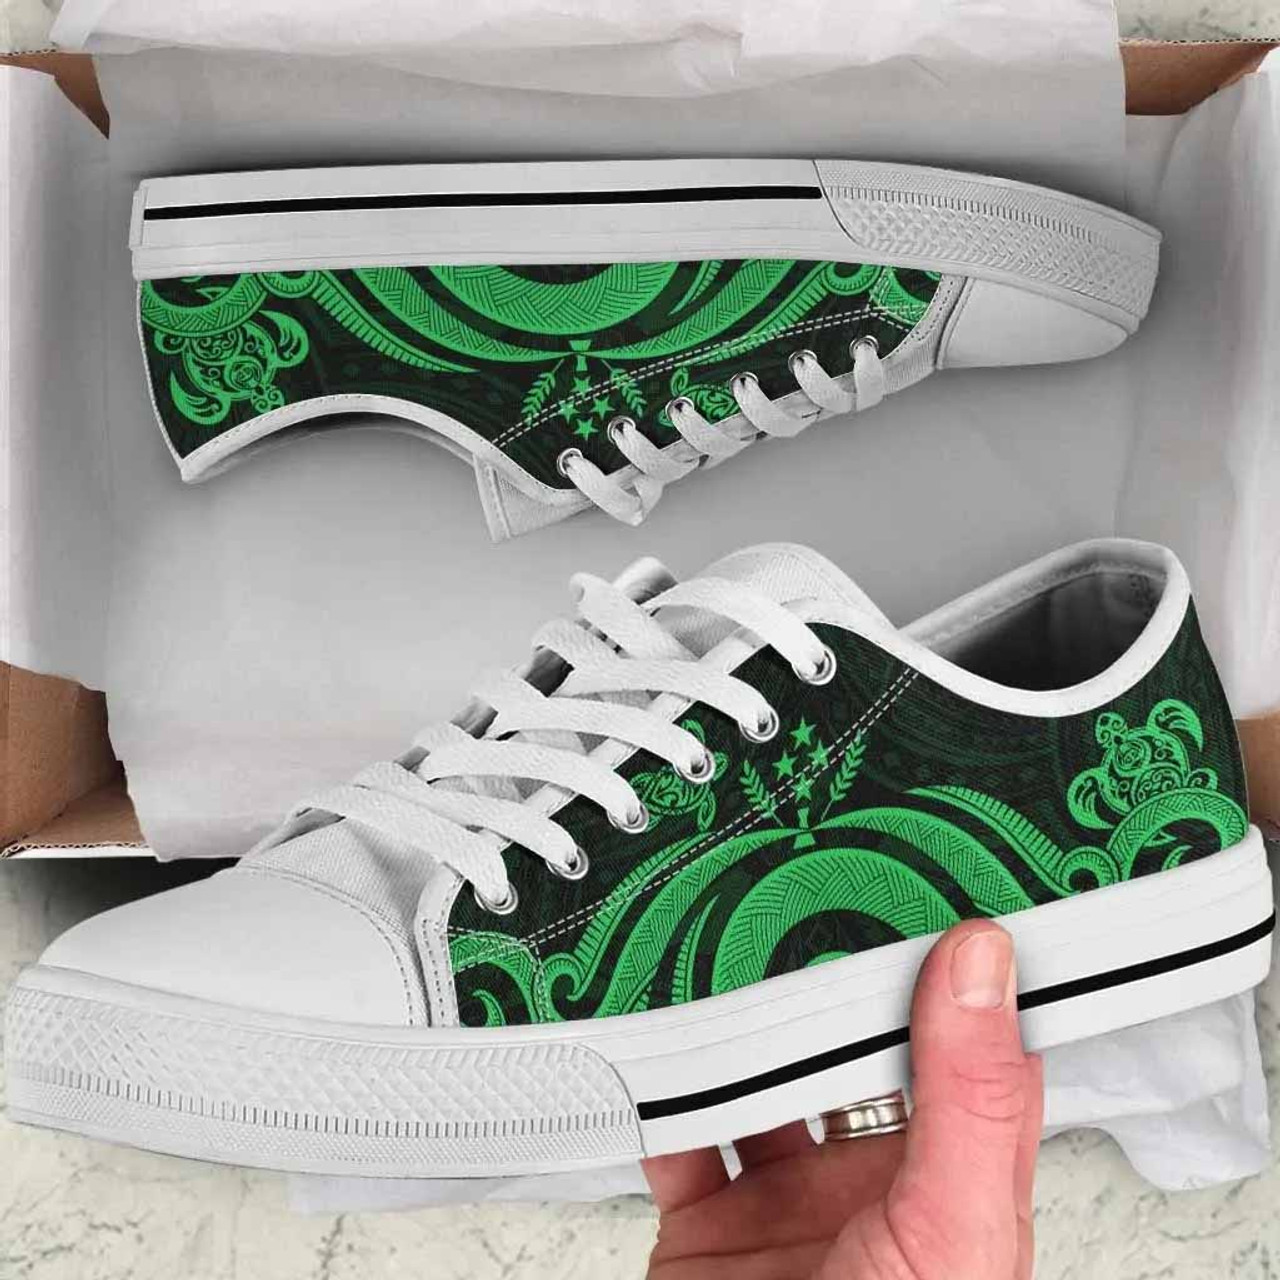 Kosrae Low Top Canvas Shoes - Green Tentacle Turtle 8